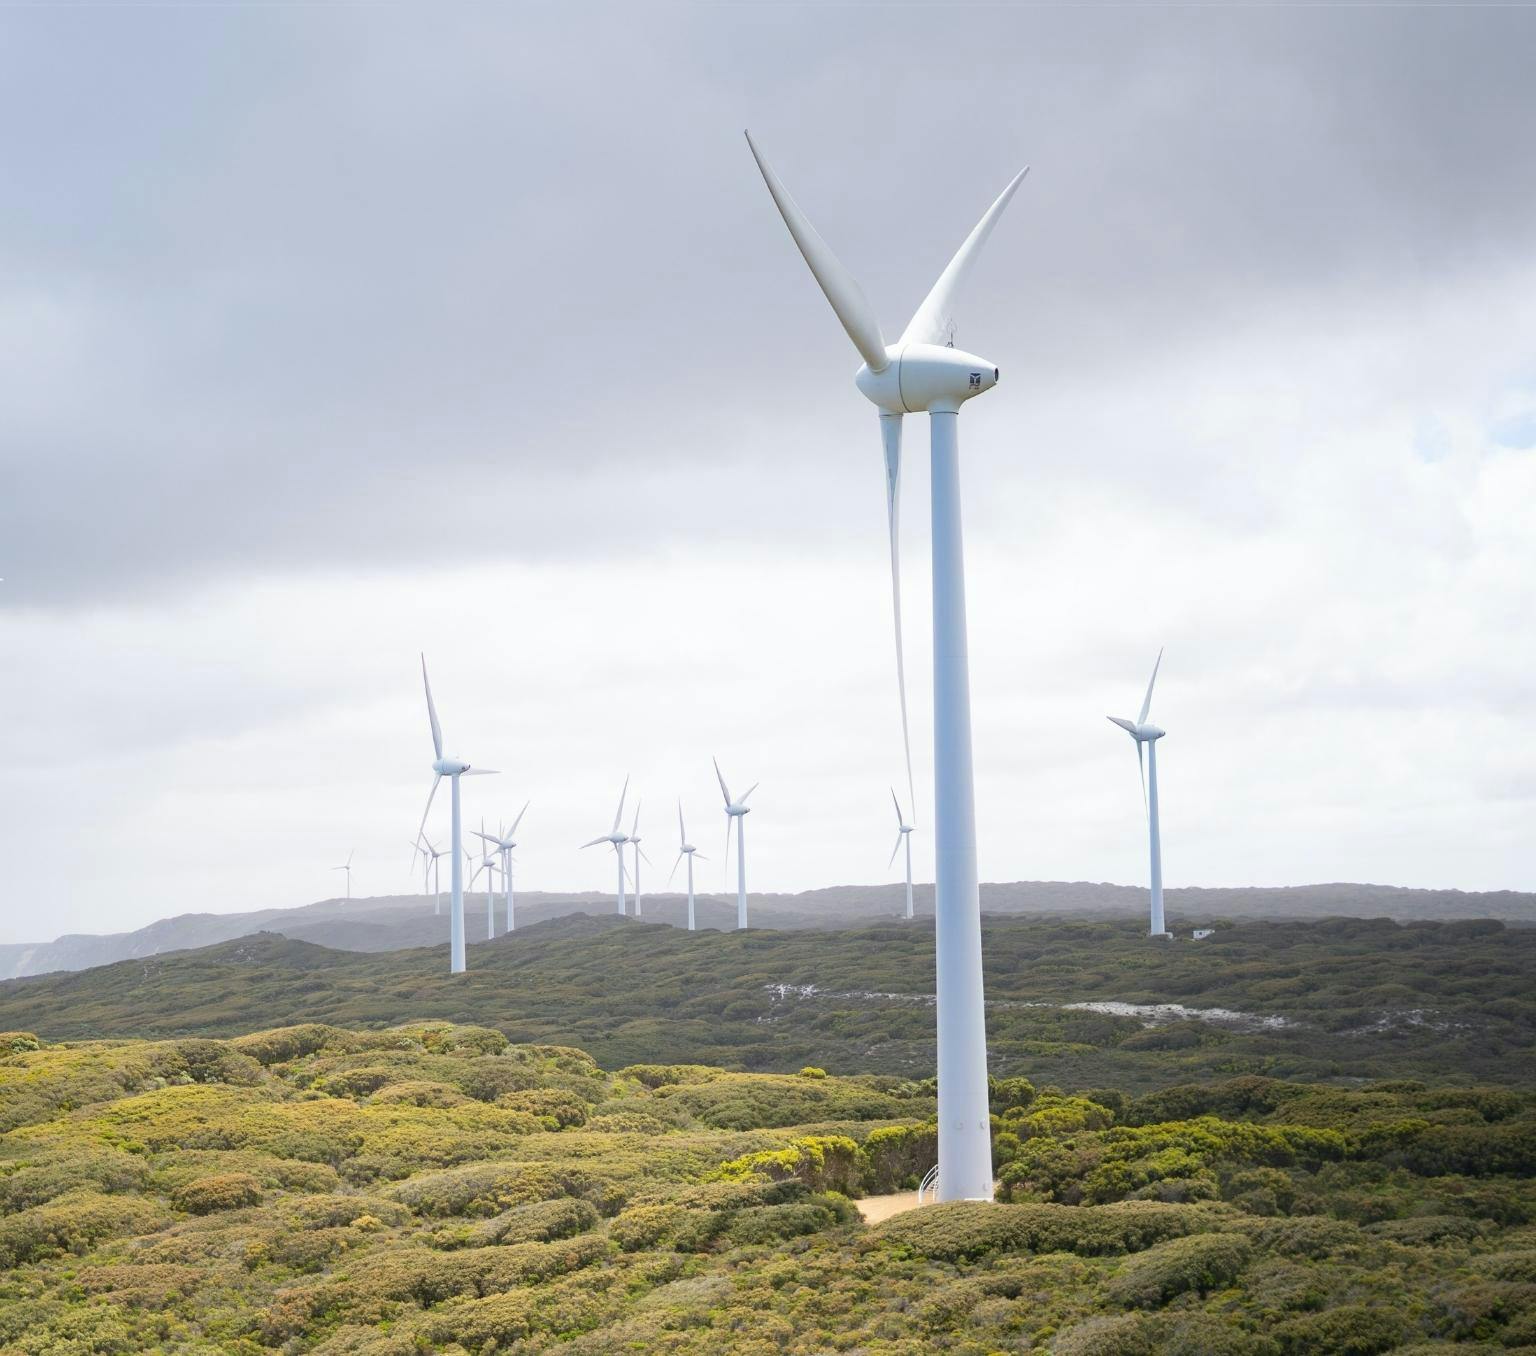 White wind turbines are [ictured on a green landscape next to the ocean with a grey cloudy sky